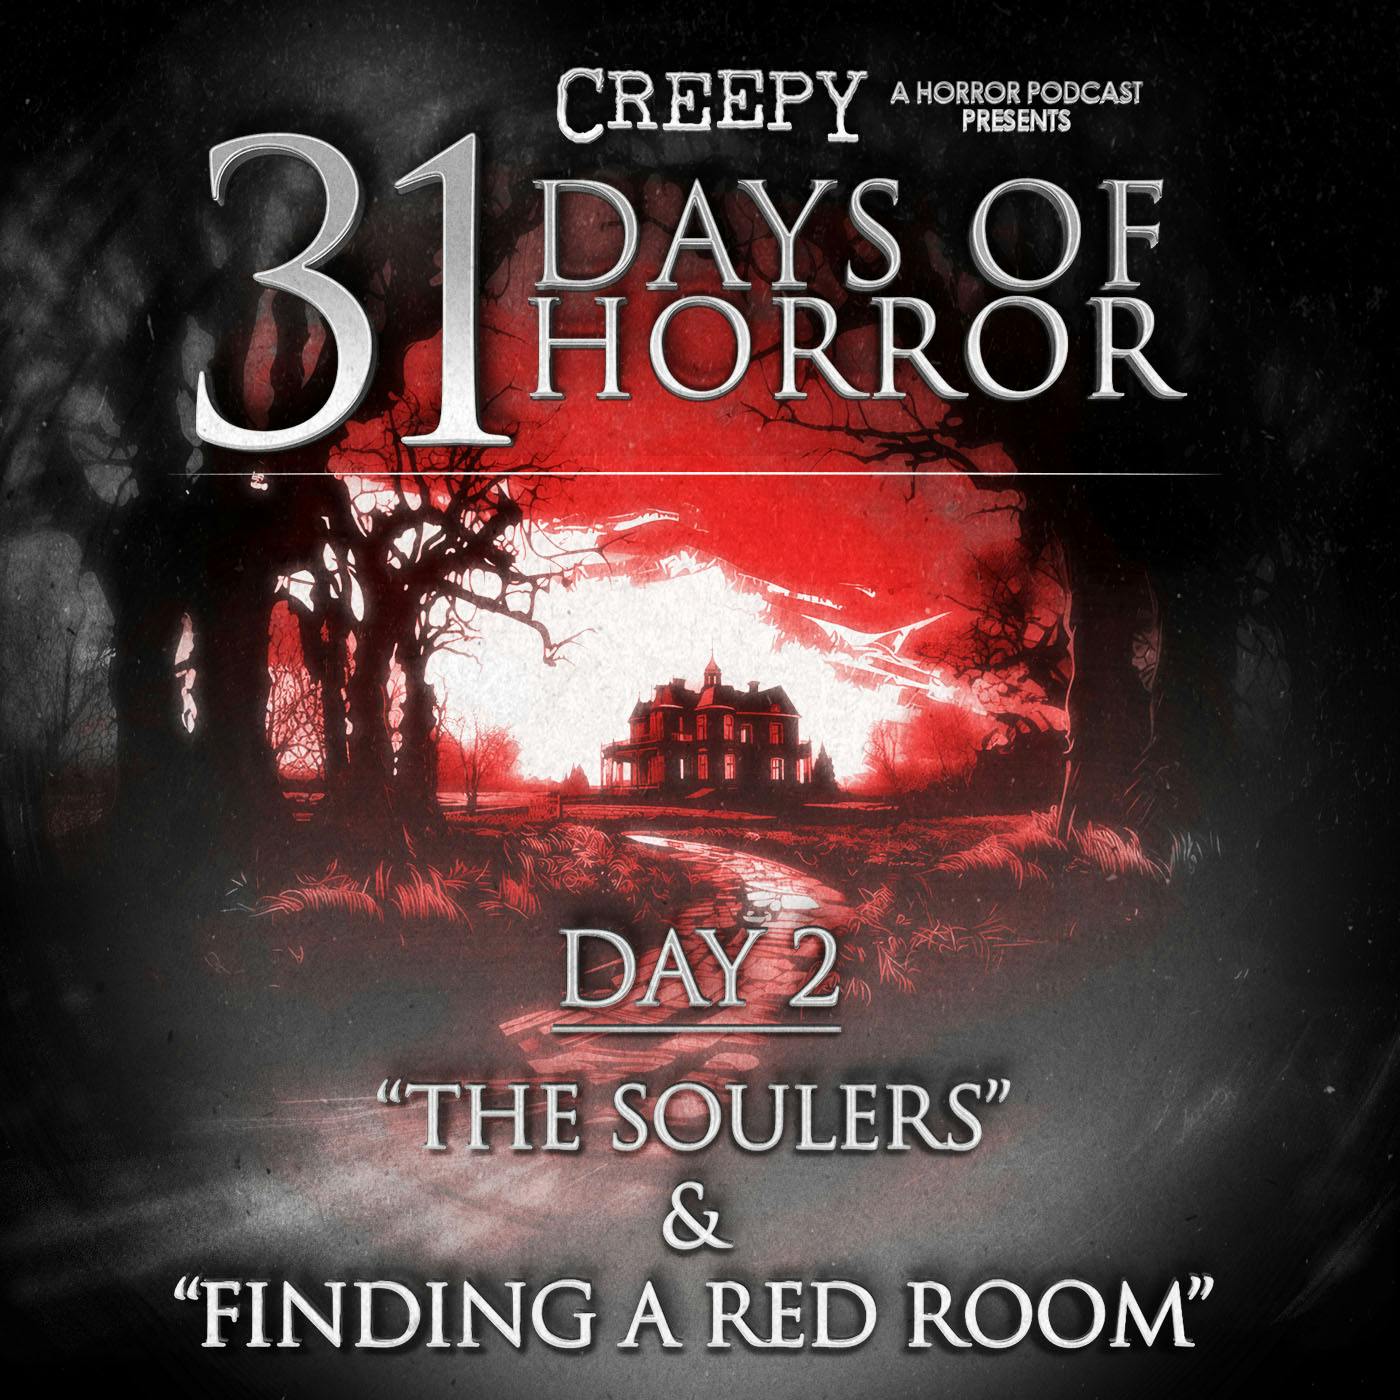 Day 2 - The Soulers & Finding a Red Room